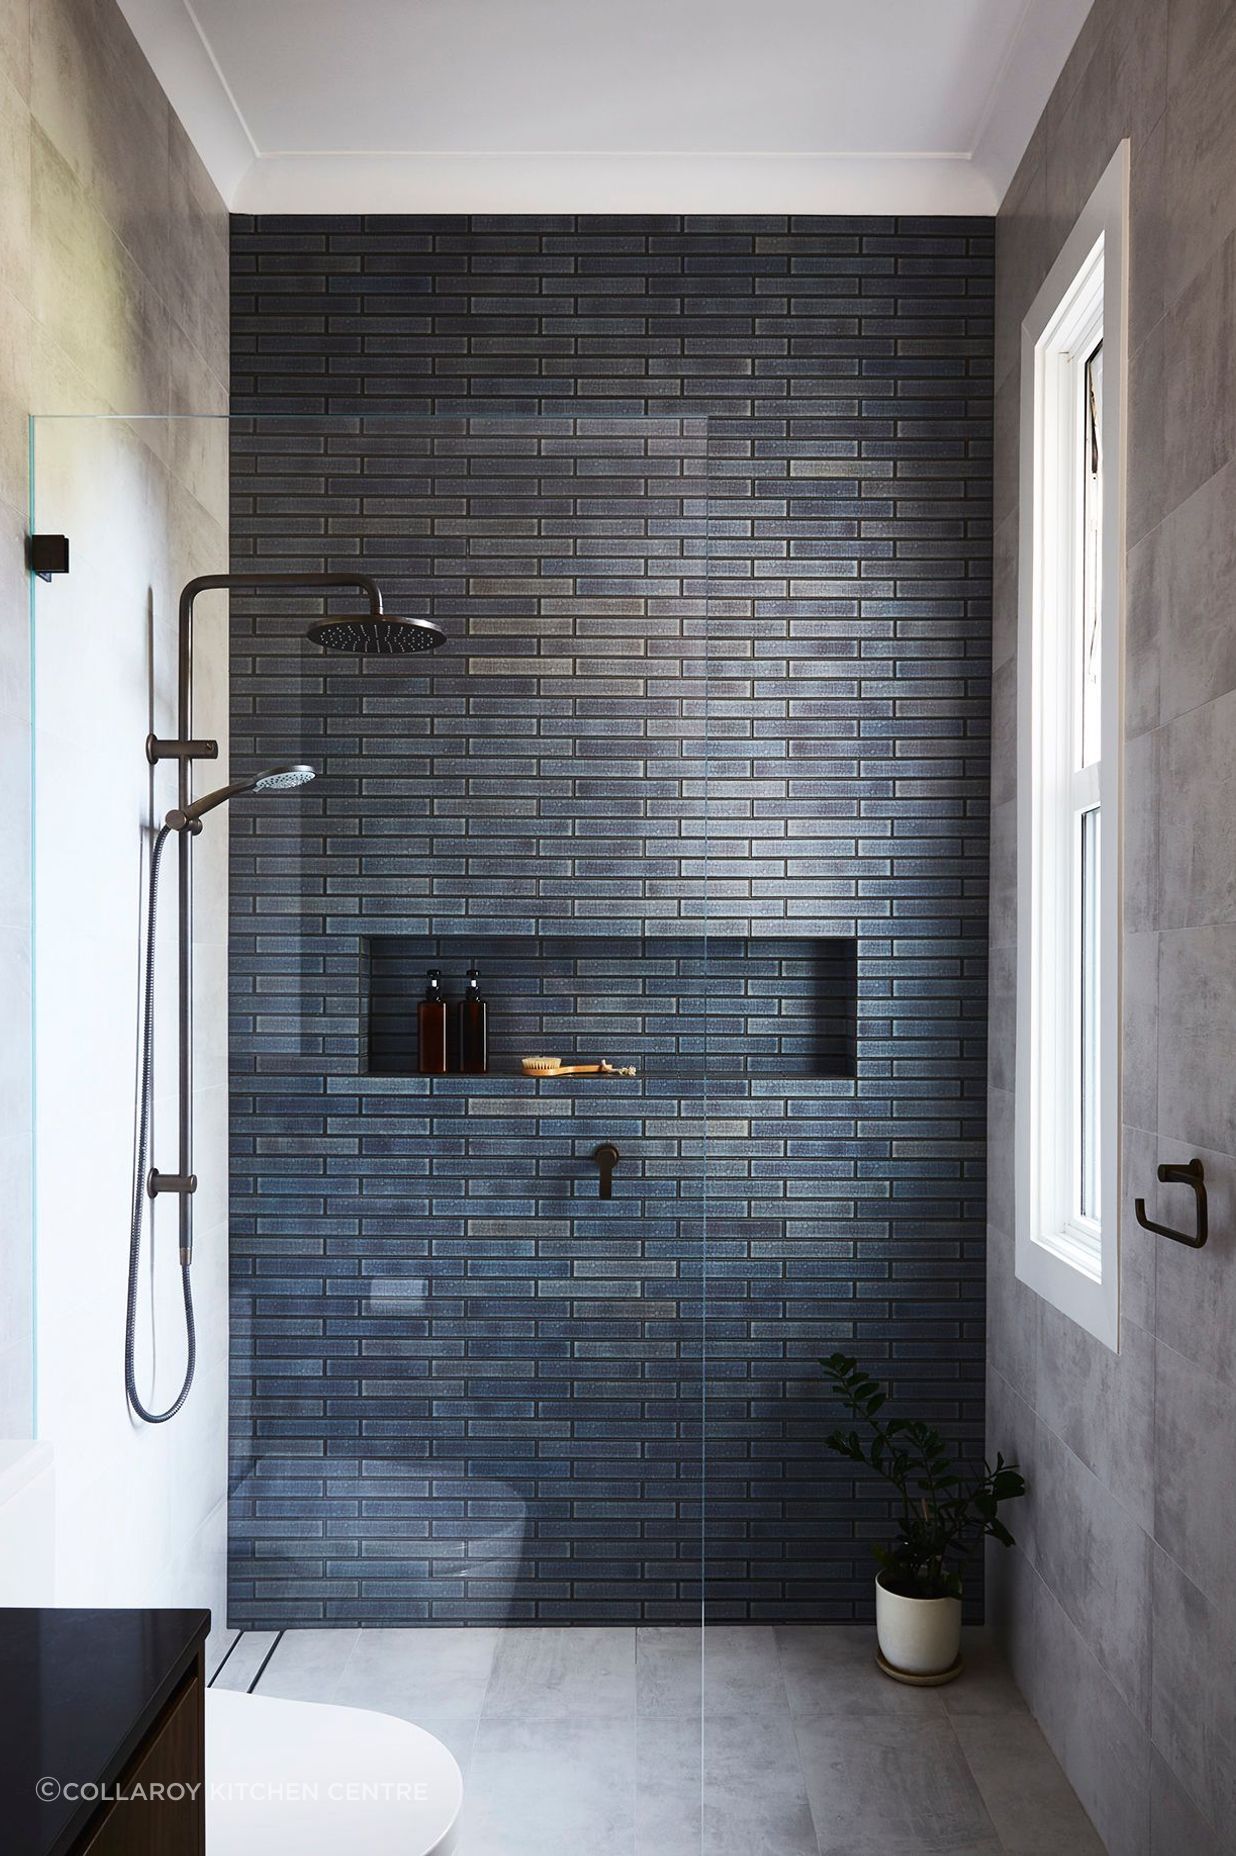 Dual shower heads provide a versatile bathing experience with their capability to provide simultaneous, multi-directional water flow. Featured project: Mosman bathroom project